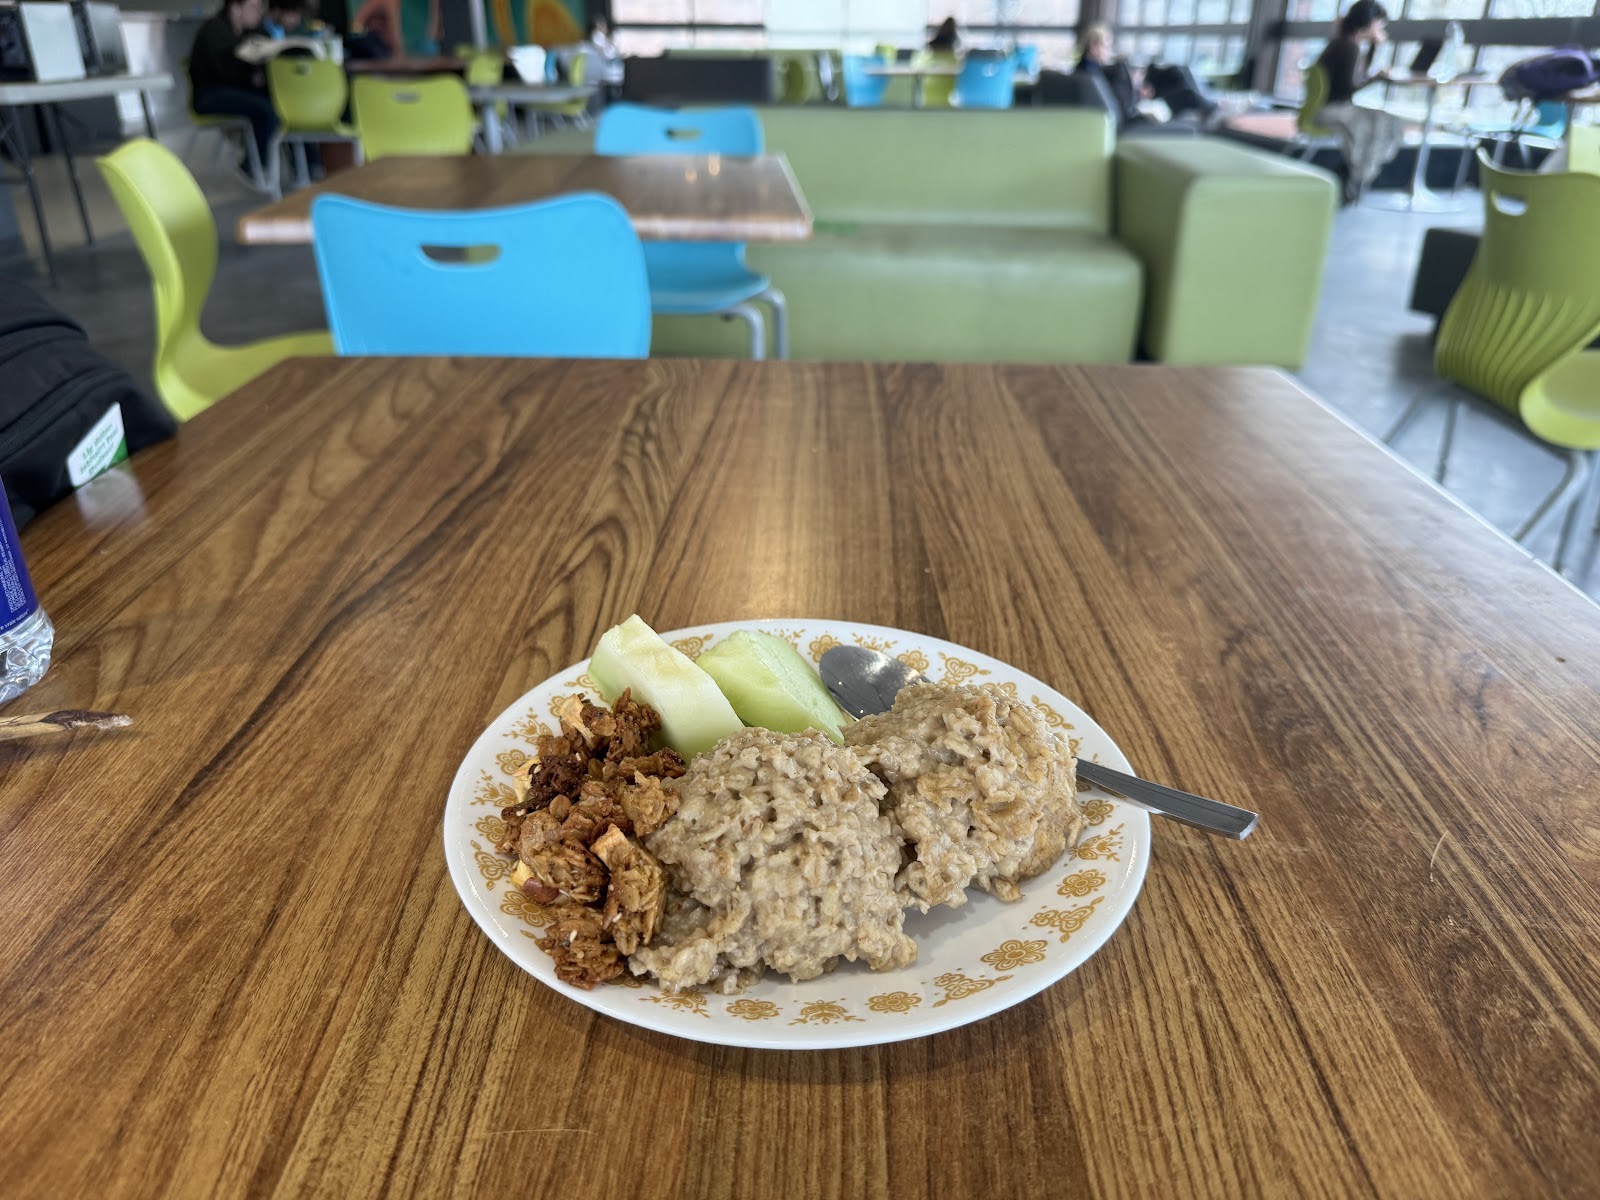 A plate of granola, oatmeal and honeydew melon on a wooden table. Blue and green chairs and sofas are visible in the background.